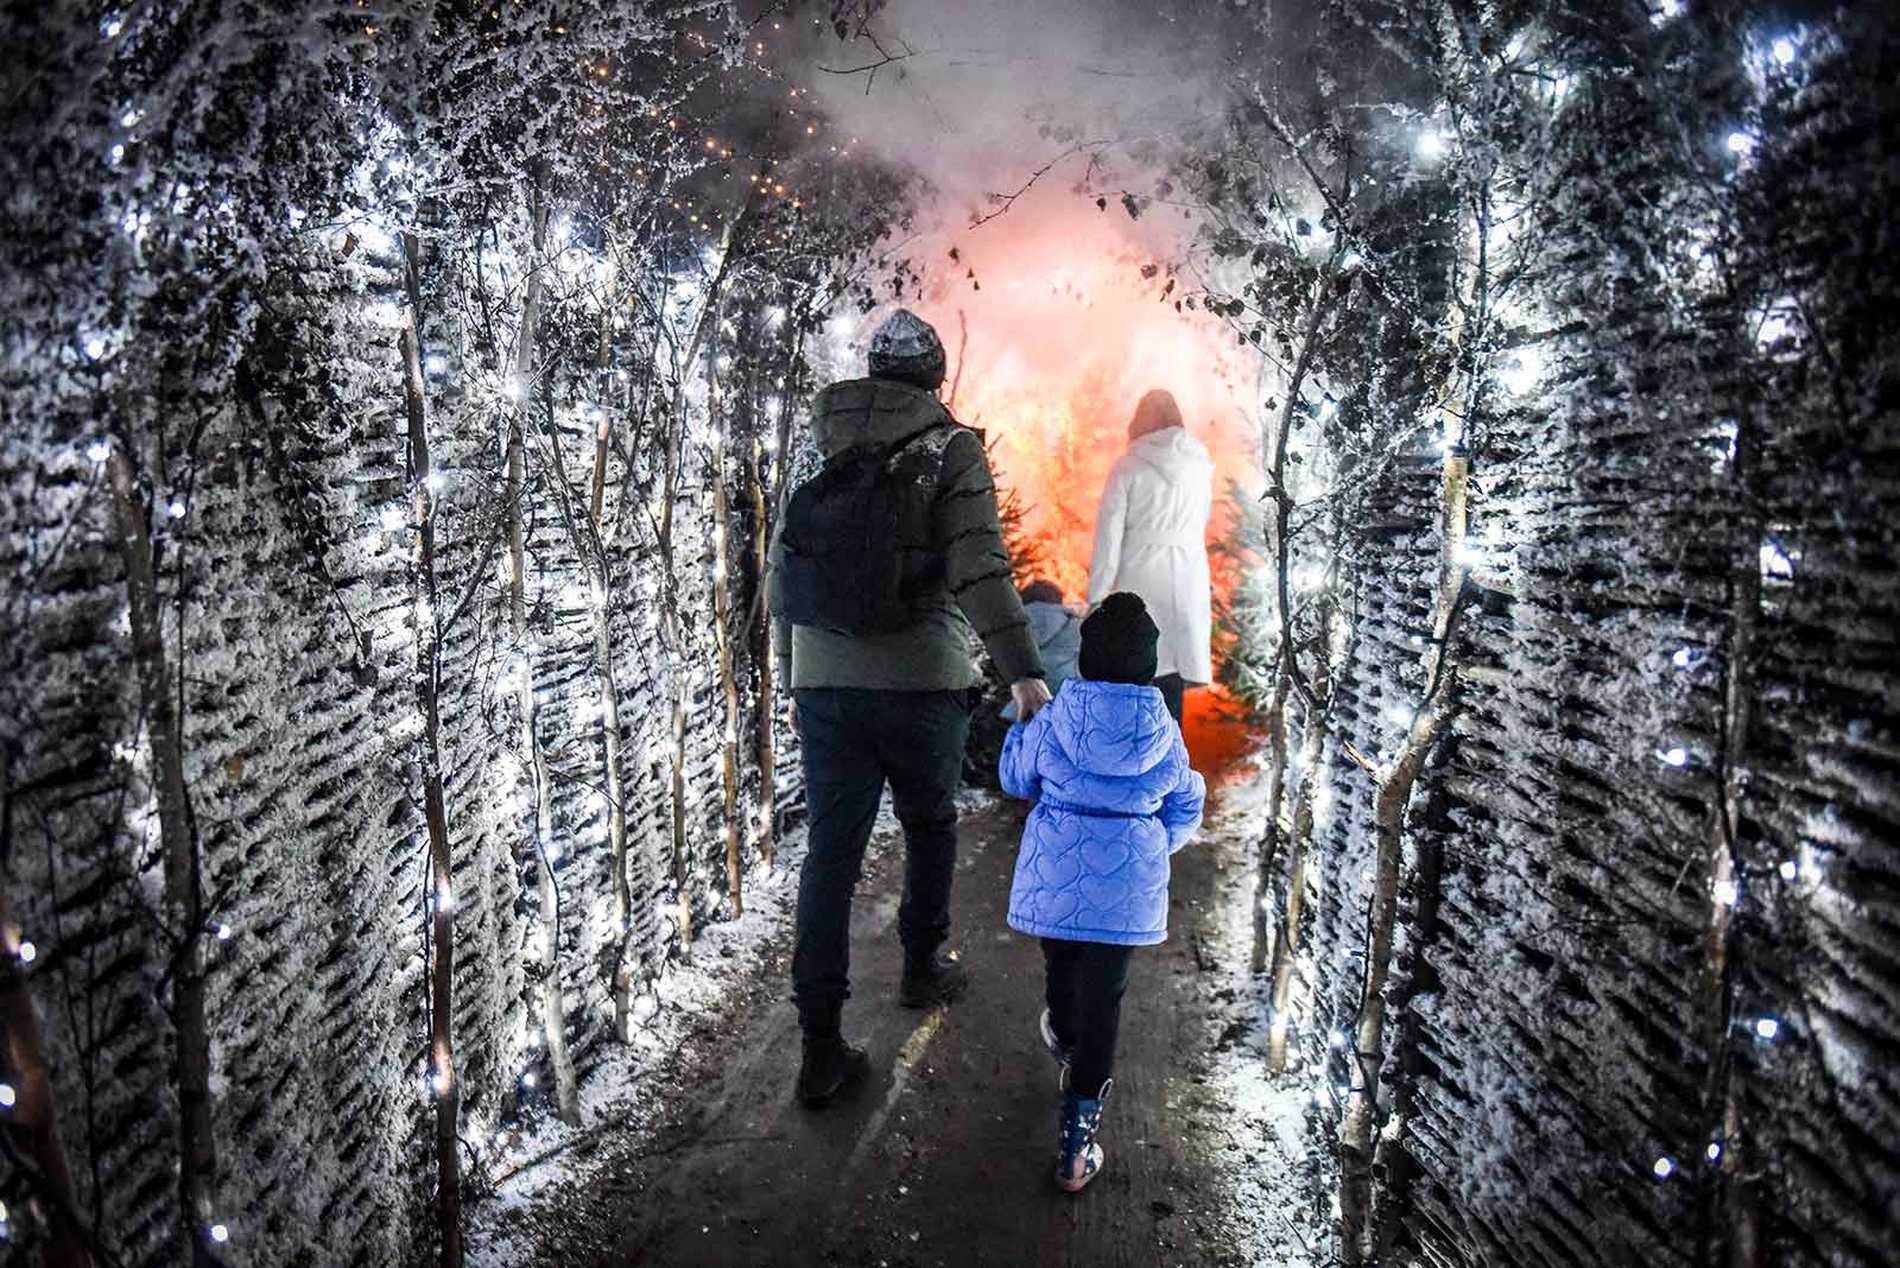 Julia and her family walking down a wintery, snow dusted pathway towards an orange glow.